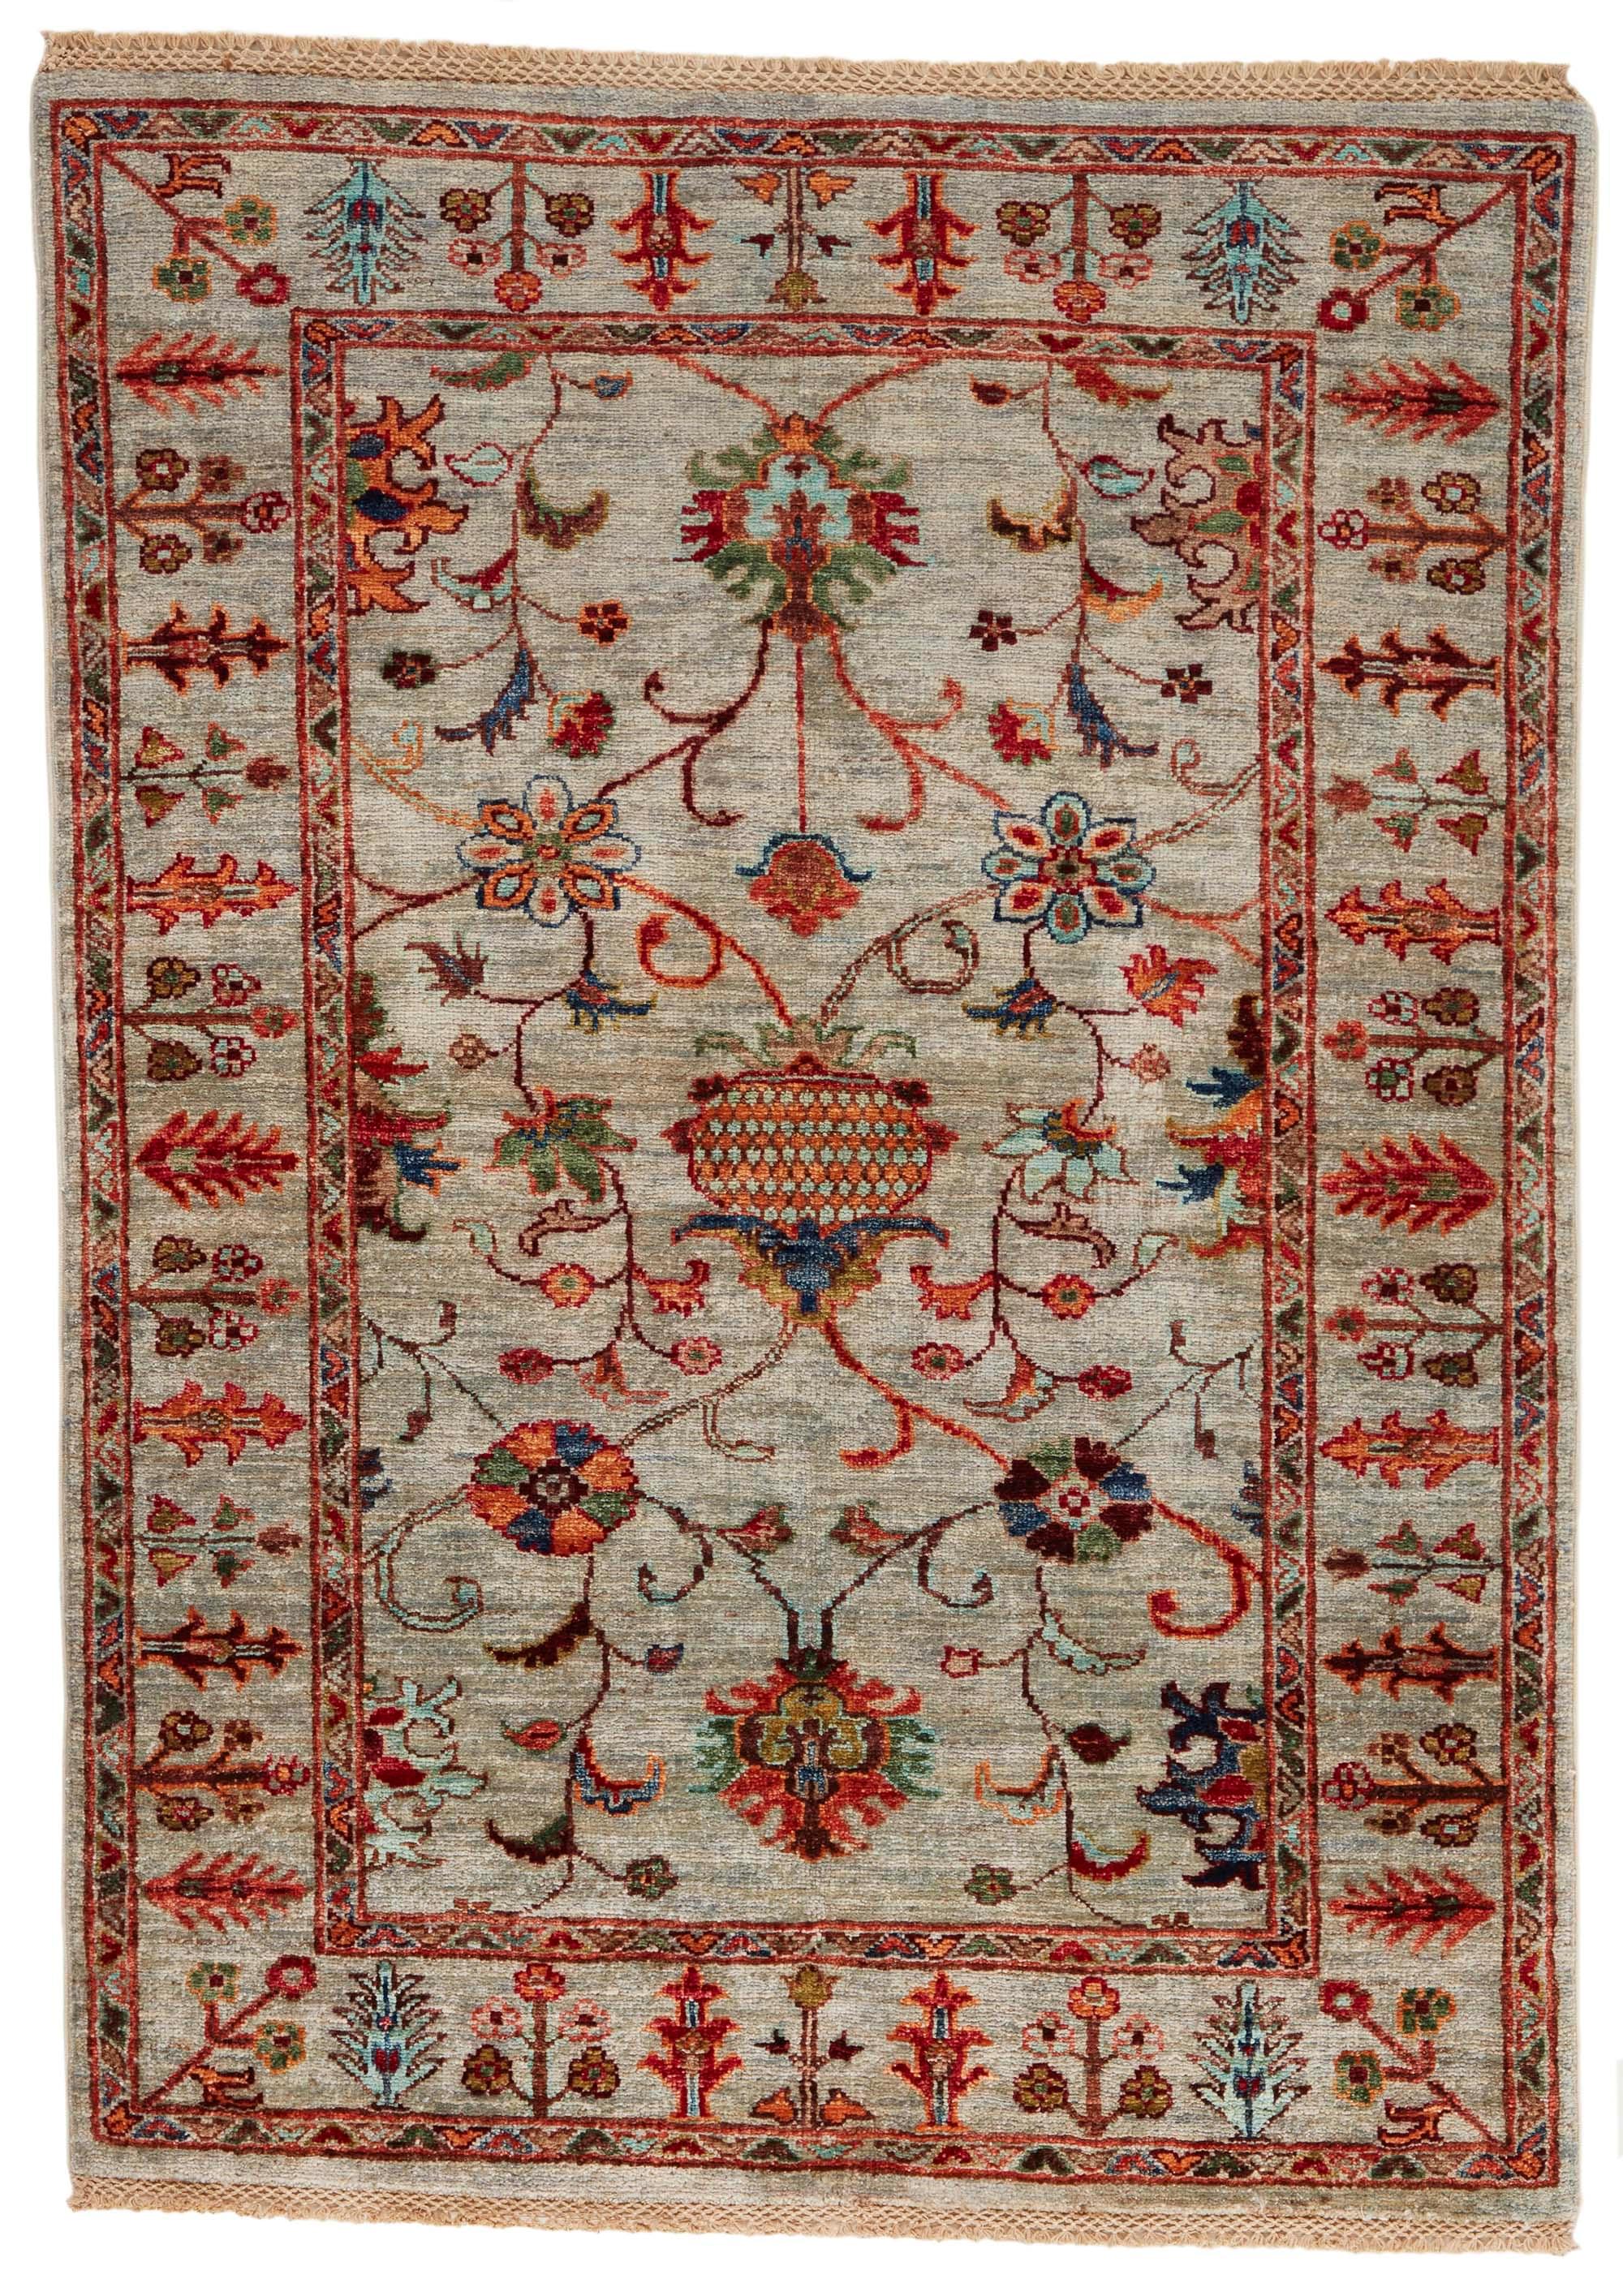 oriental rug with red, yellow, blue, green, sky, beige and brown floral pattern